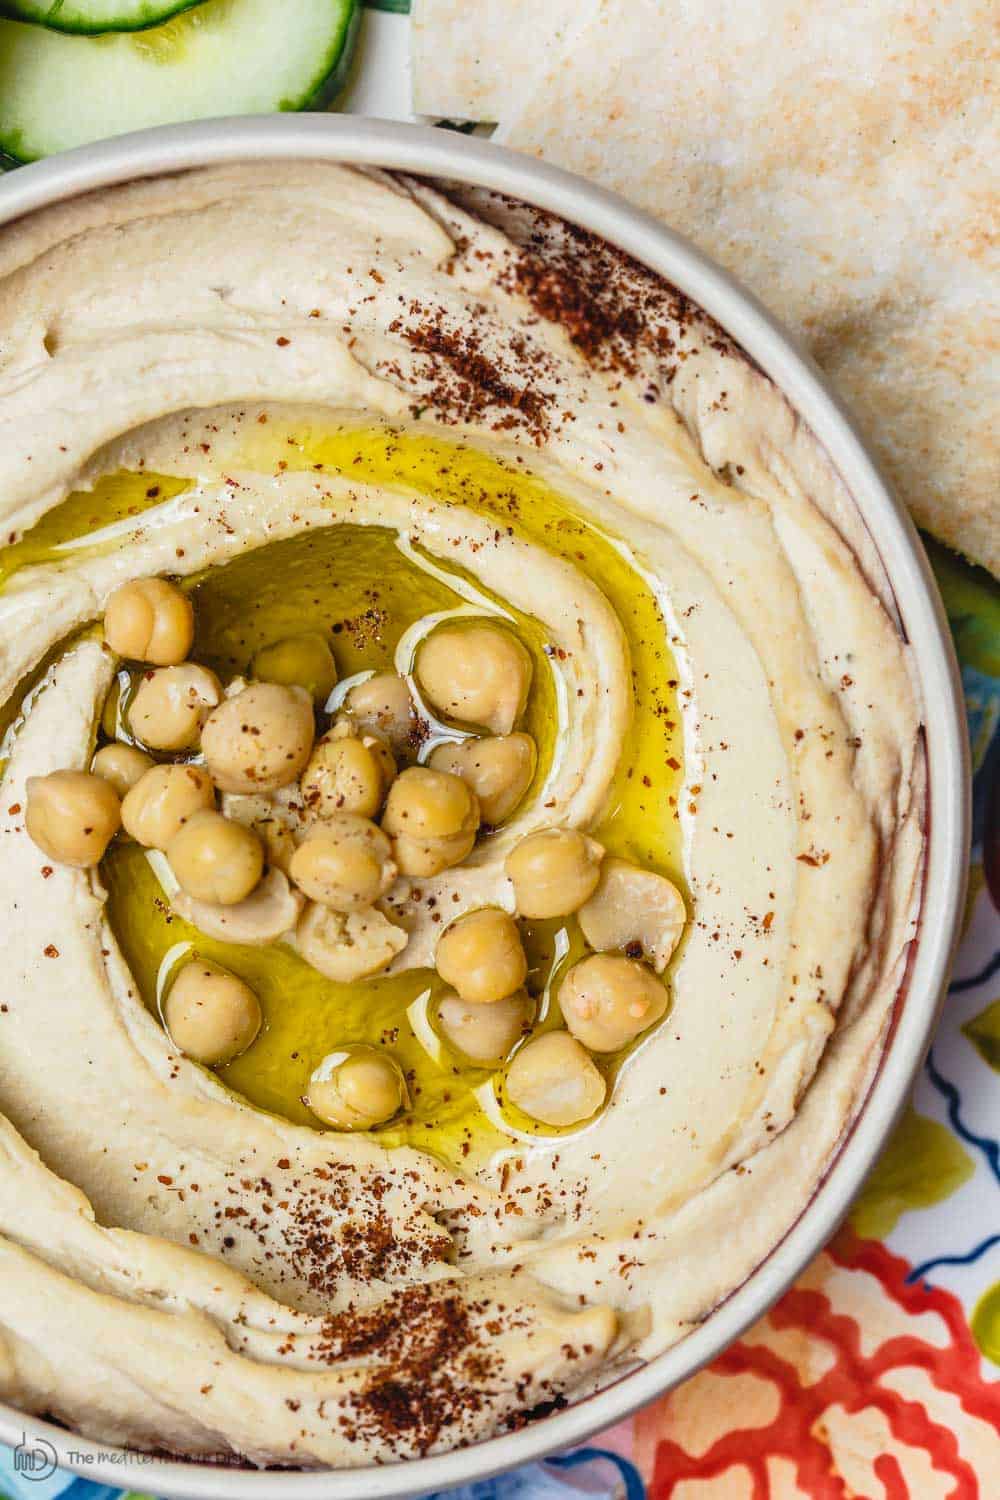 Easy Hummus Recipe Authentic Homemade From Scratch The Mediterranean Dish,Whirlpool Cabrio Washer And Dryer